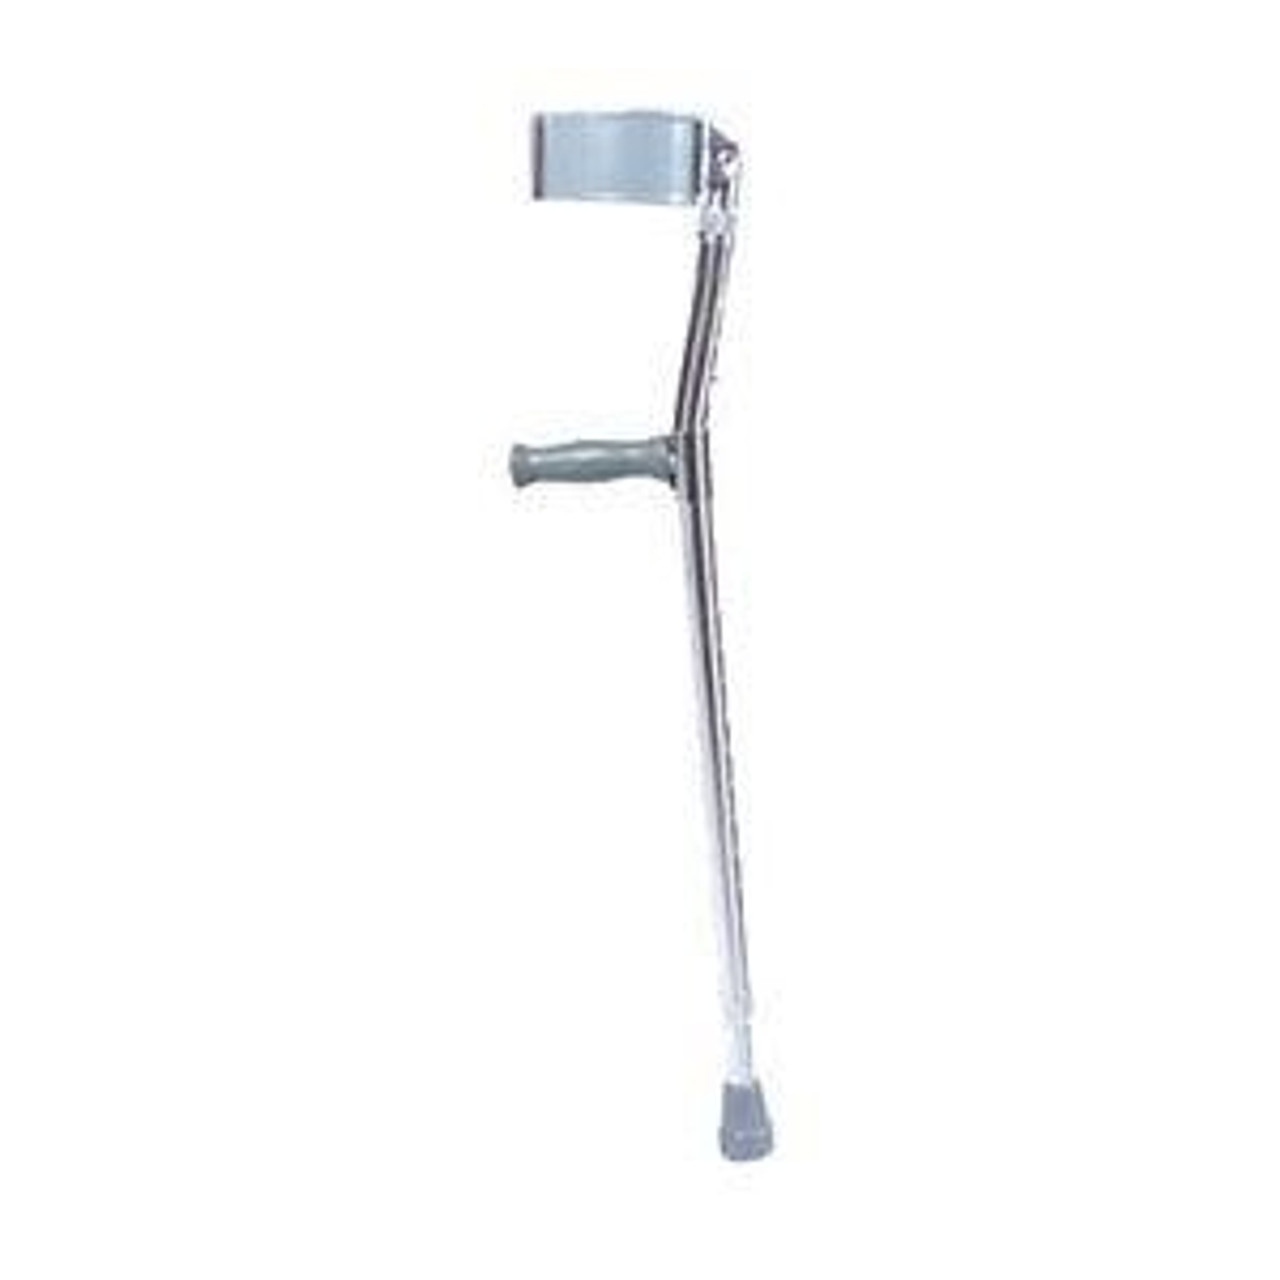 Bariatric Offset Handle Cane Tall Adult, Black